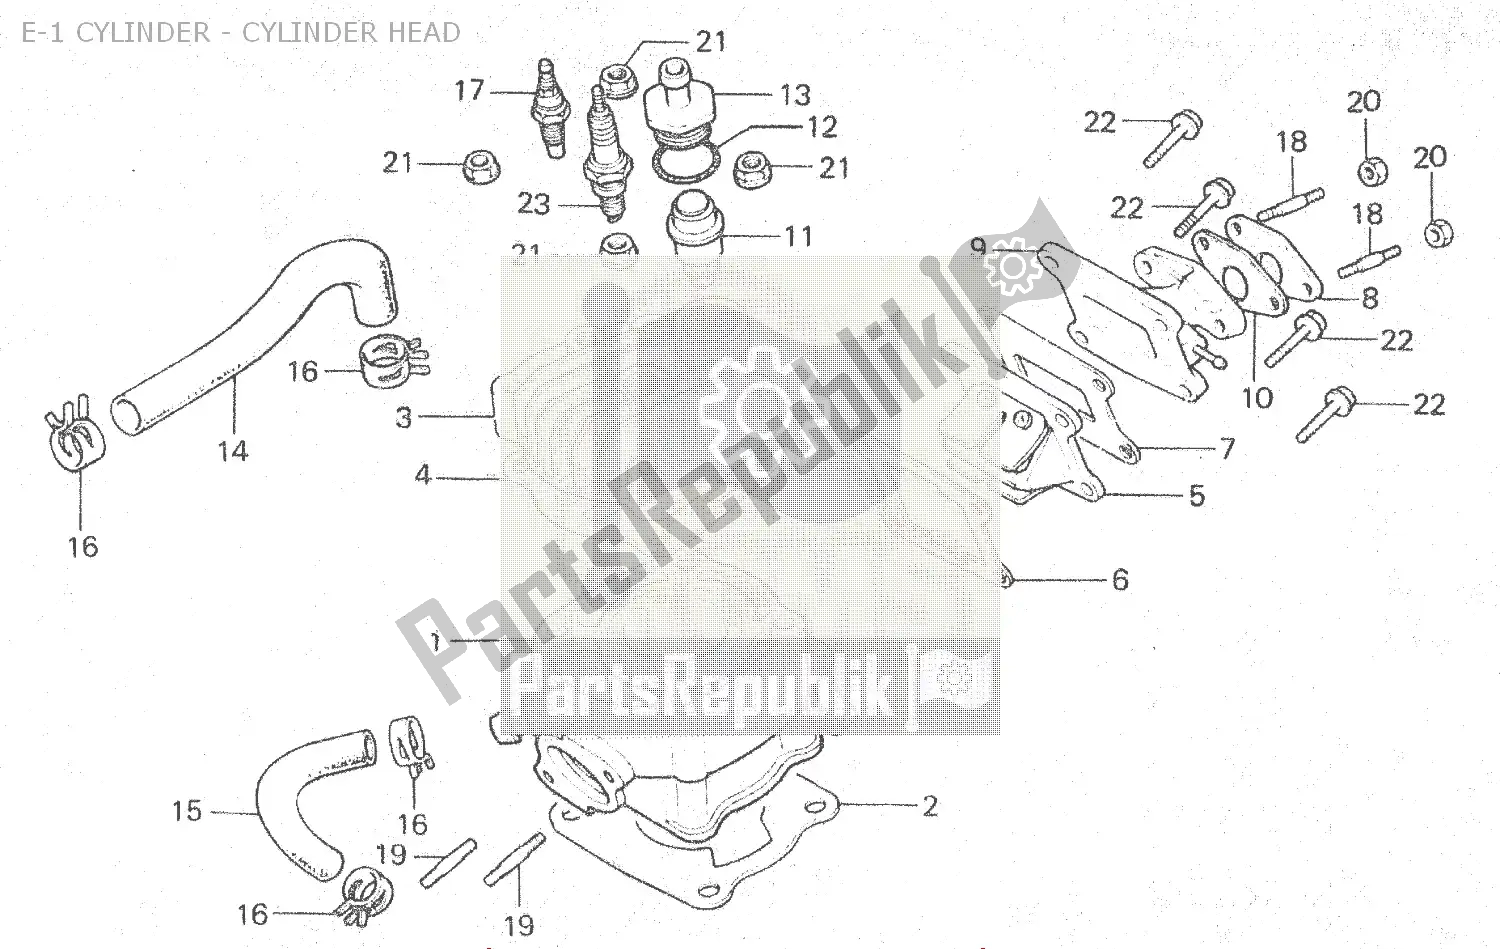 All parts for the E-1 Cylinder - Cylinder Head of the Honda MTX 80 1983